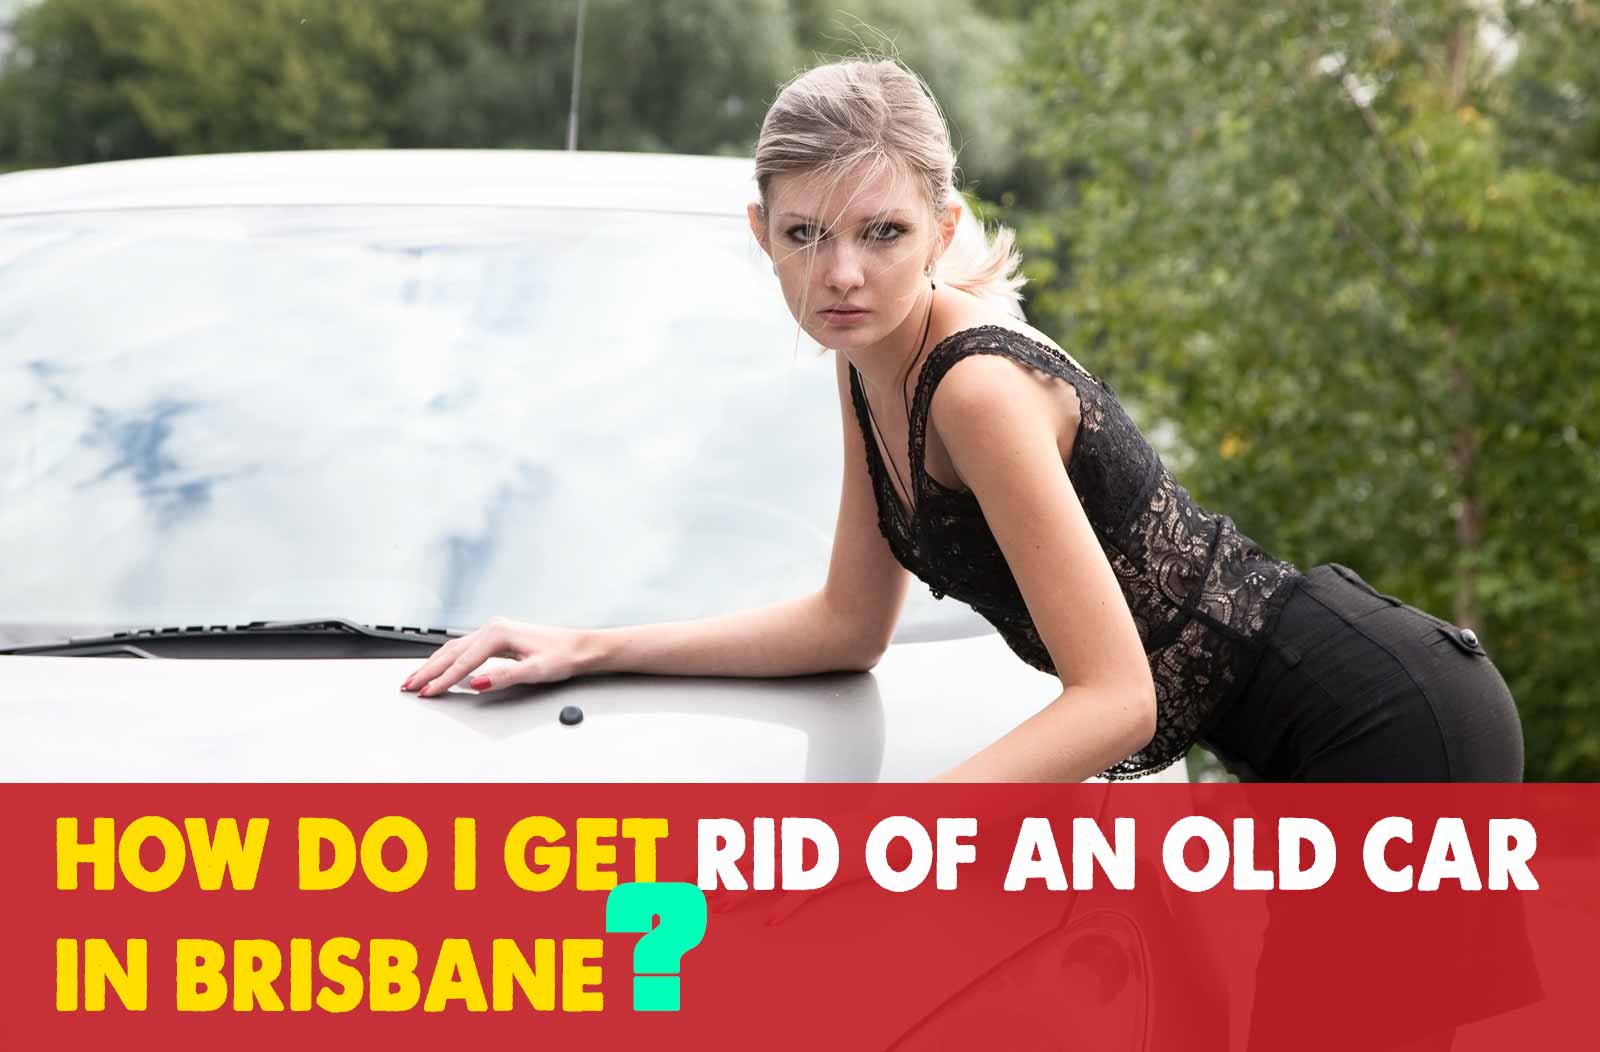 How do I get rid of an old car in Brisbane?